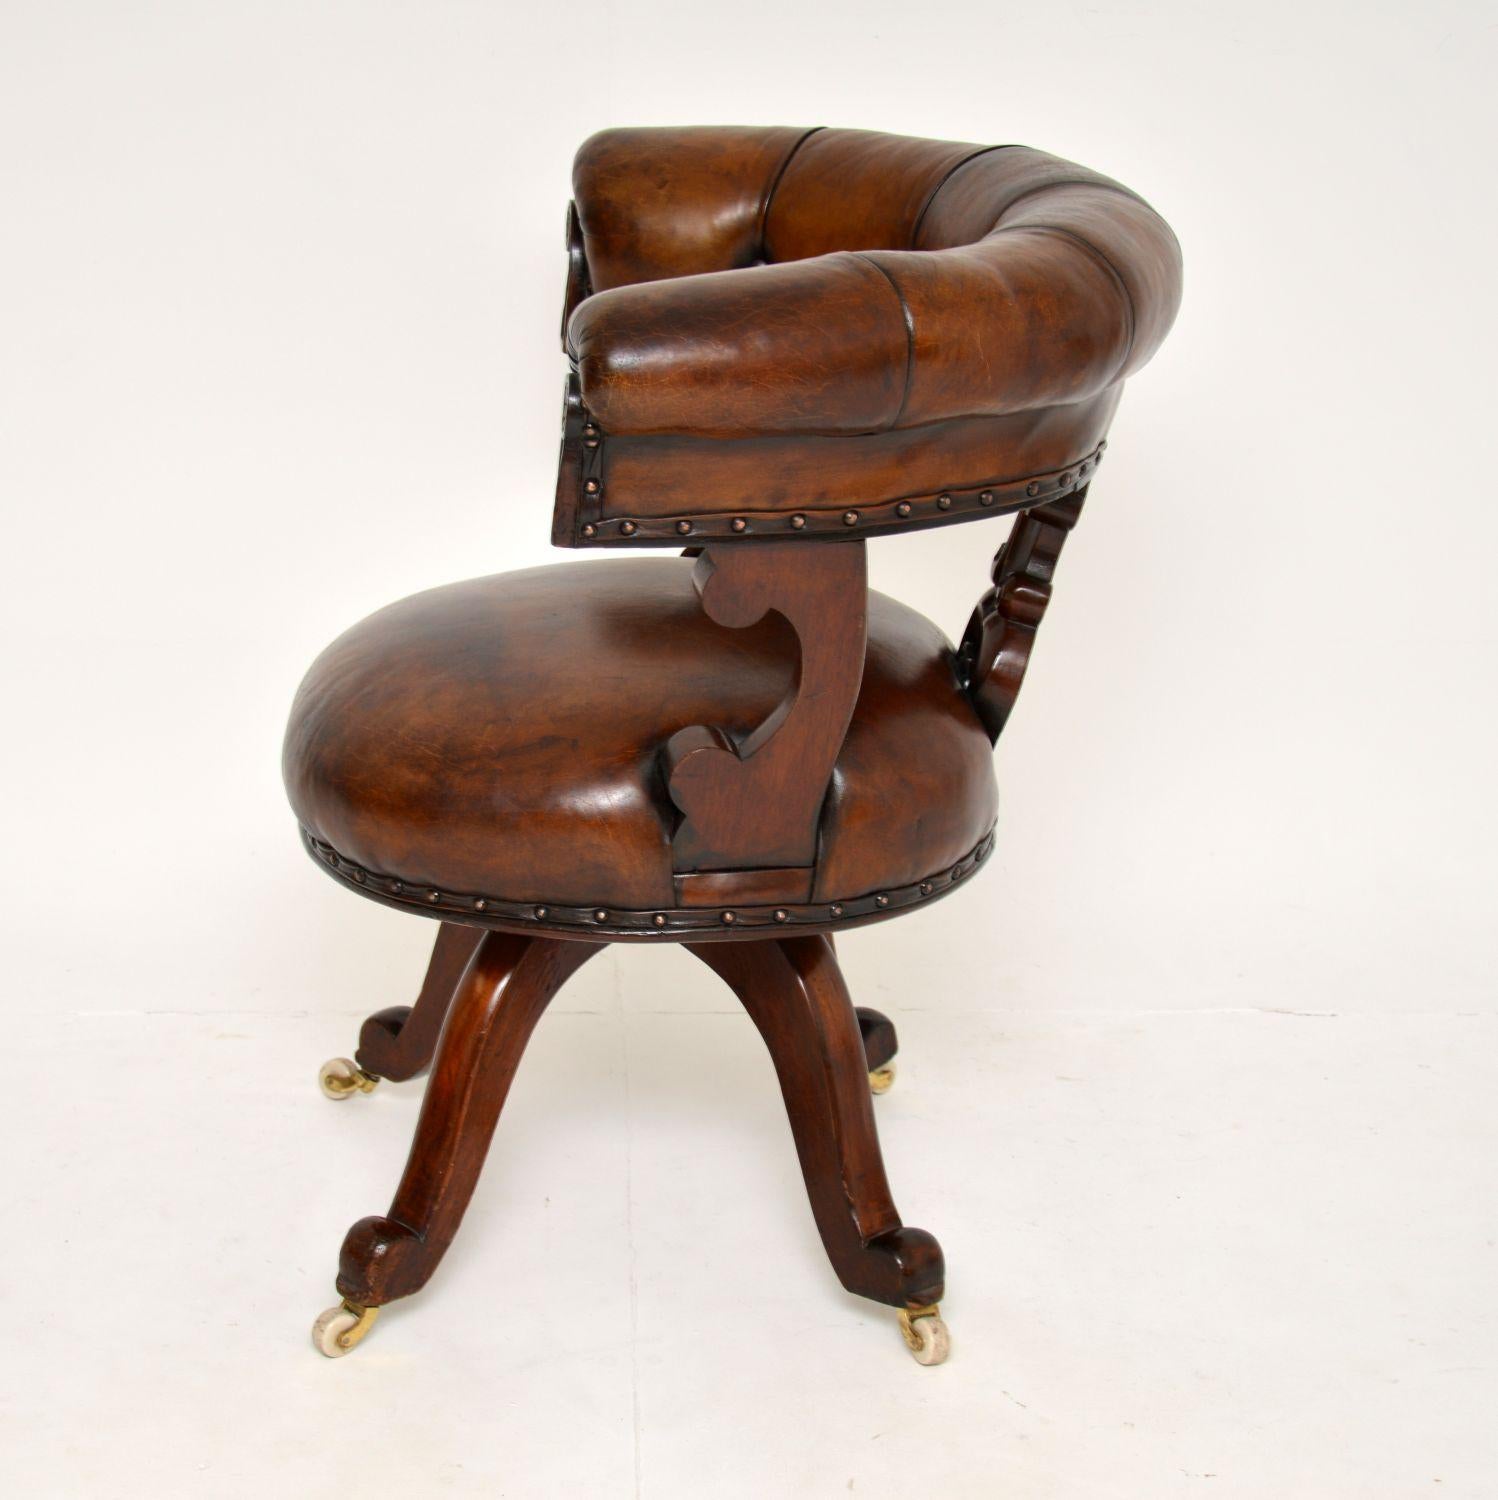 English Antique William IV Leather & Wood Desk Chair